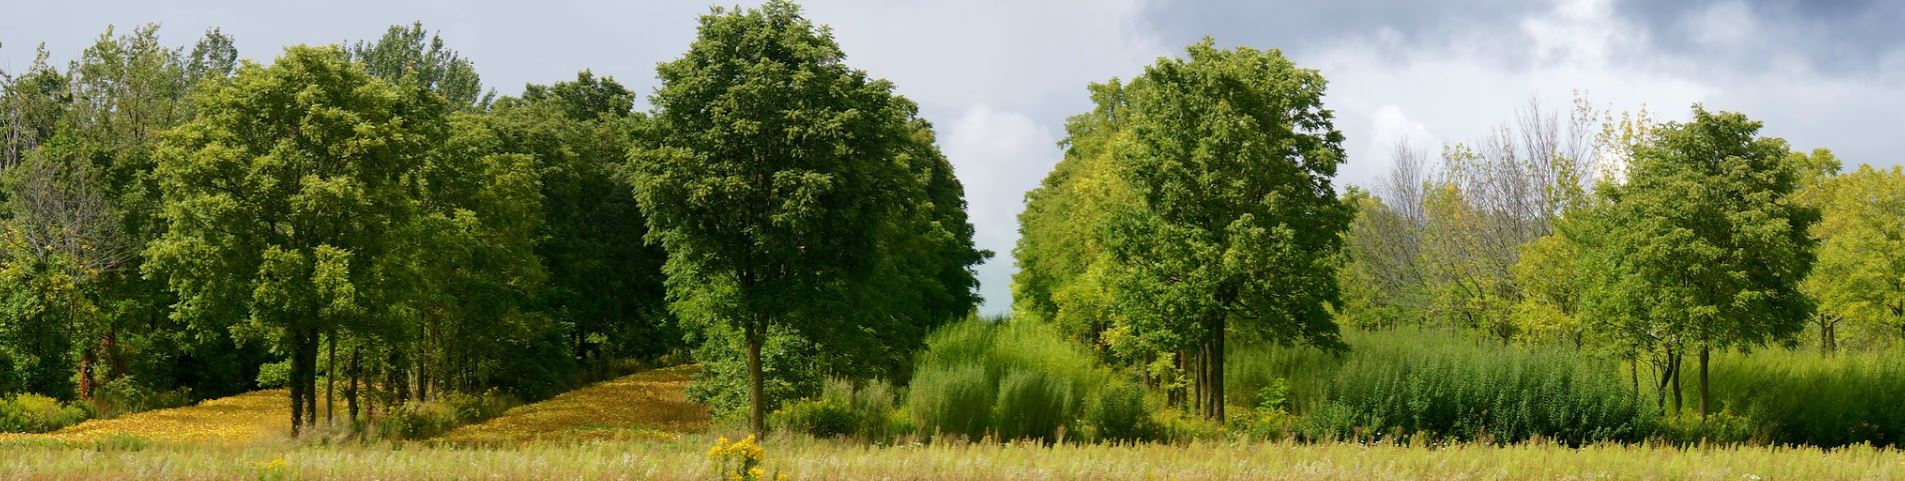 Figure 3: A mature, diverse alley cropping system featuring a variety of tree crops and alley crops (Montpellier, France).